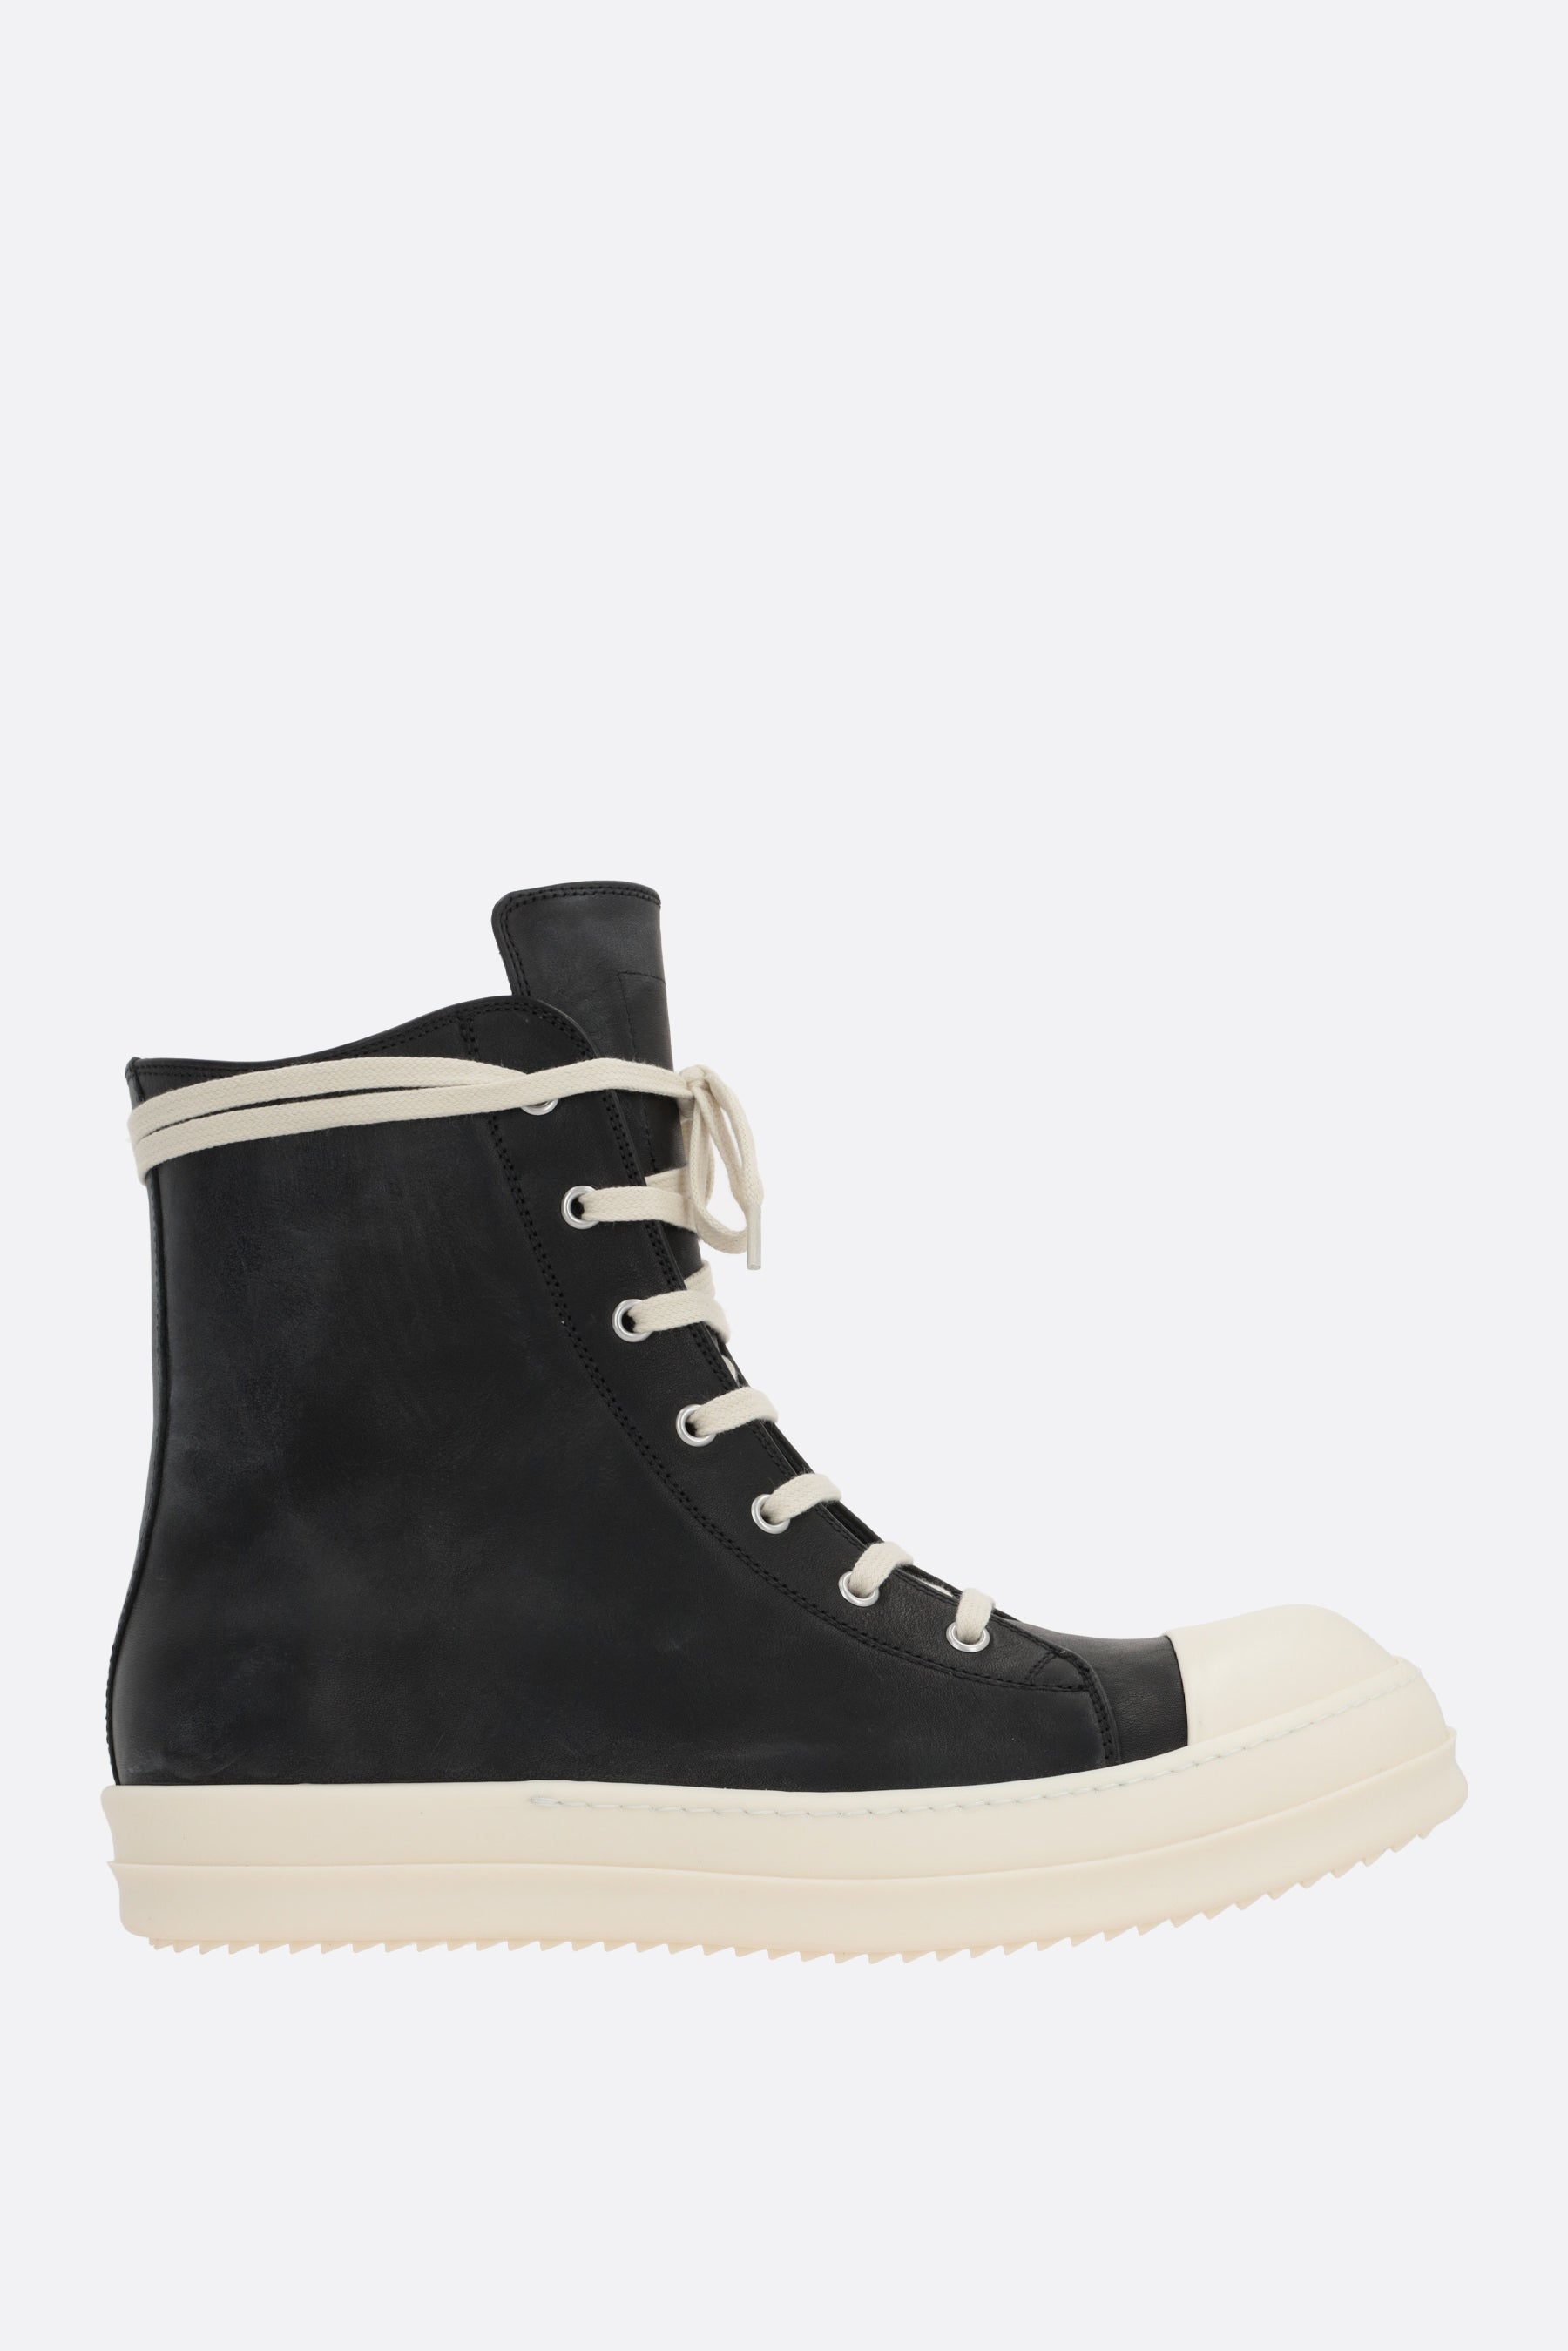 Lido smooth leather high-top sneakers